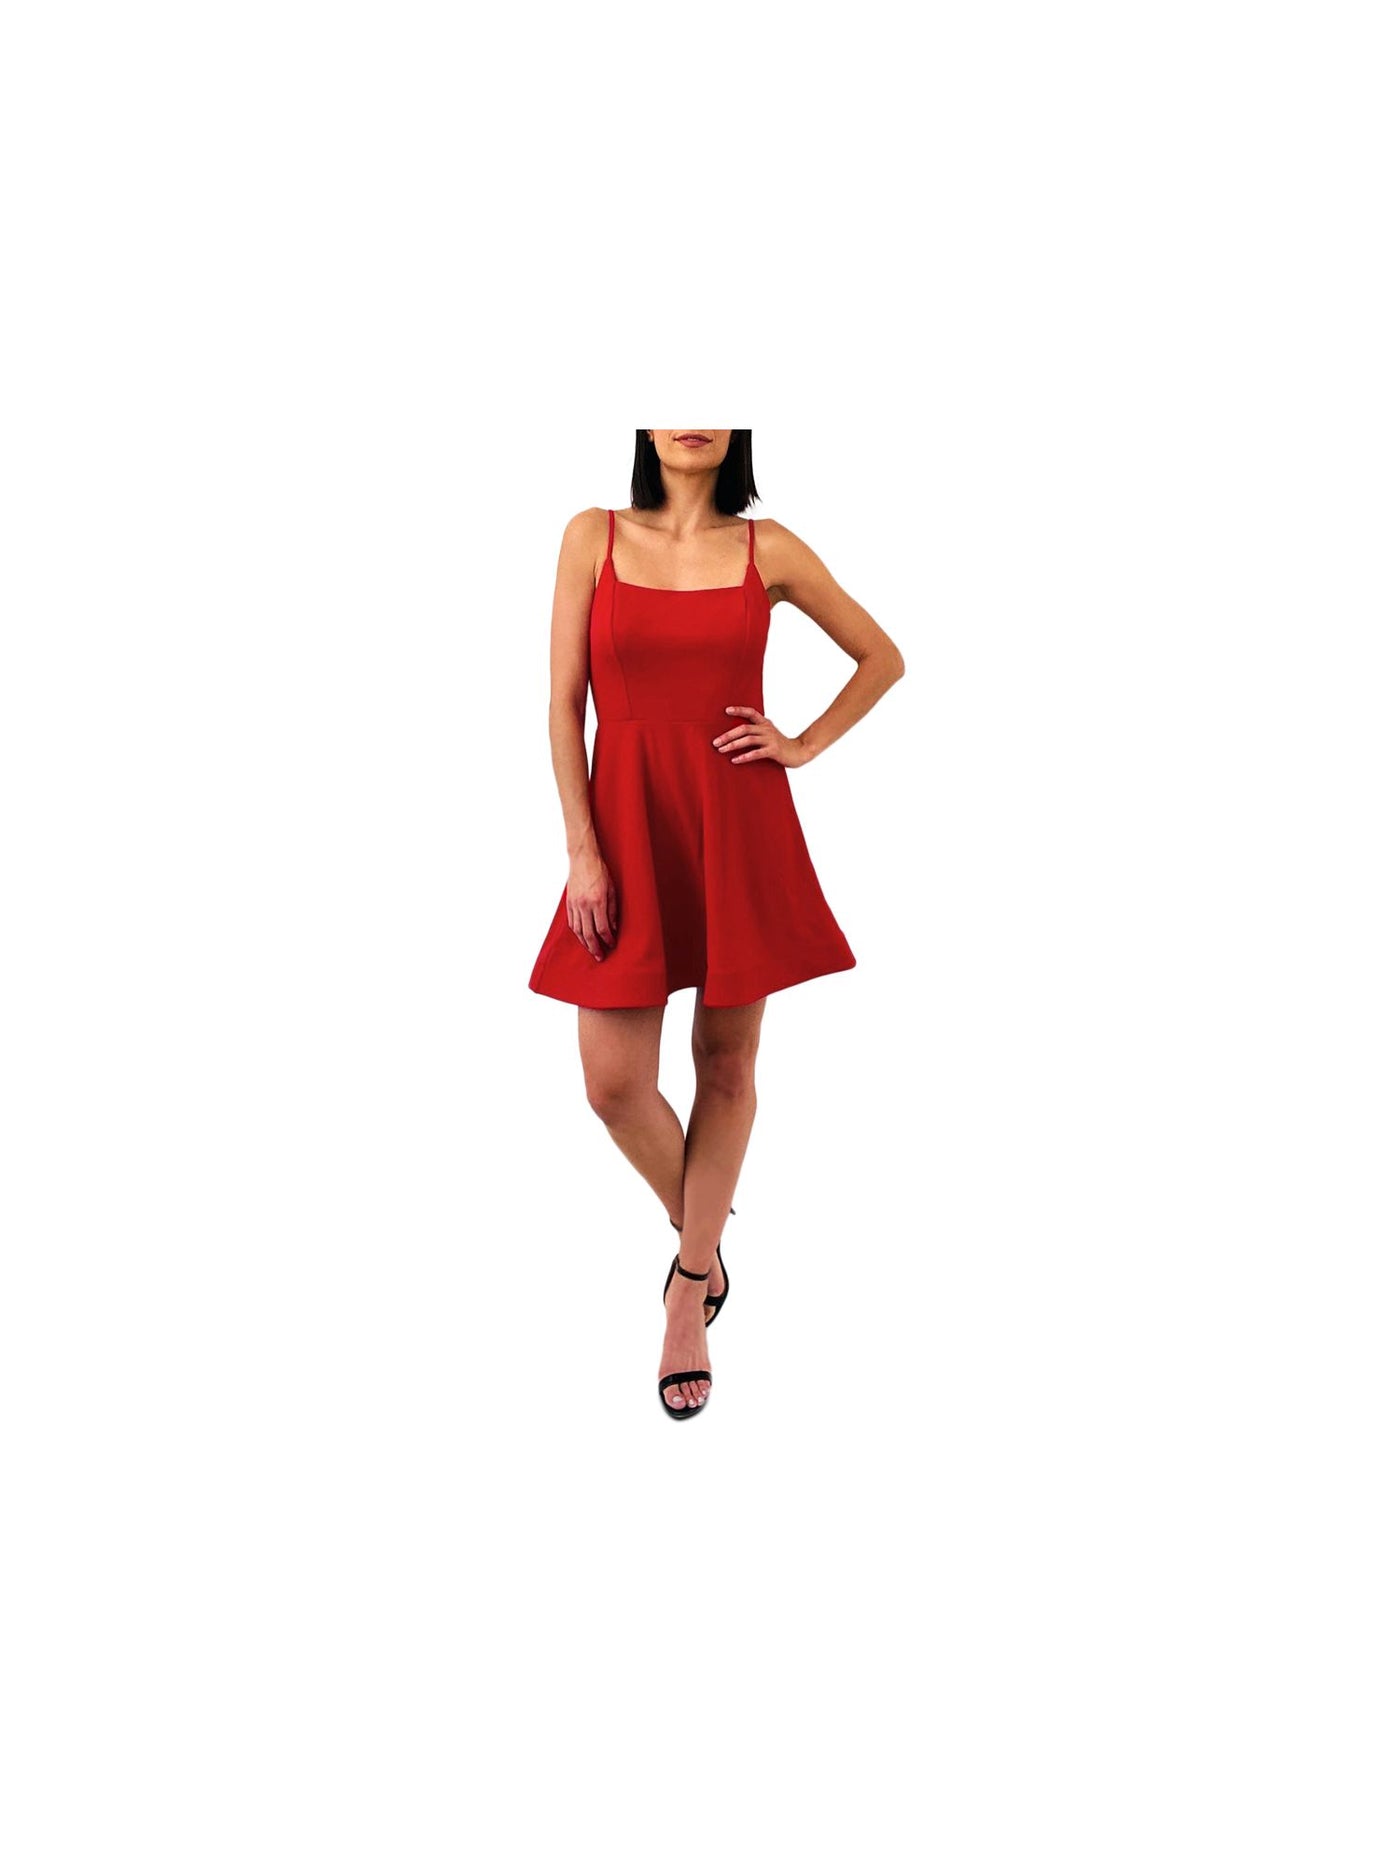 TRIXXI Womens Red Cut Out Spaghetti Strap Square Neck Short Party Fit + Flare Dress Juniors 7